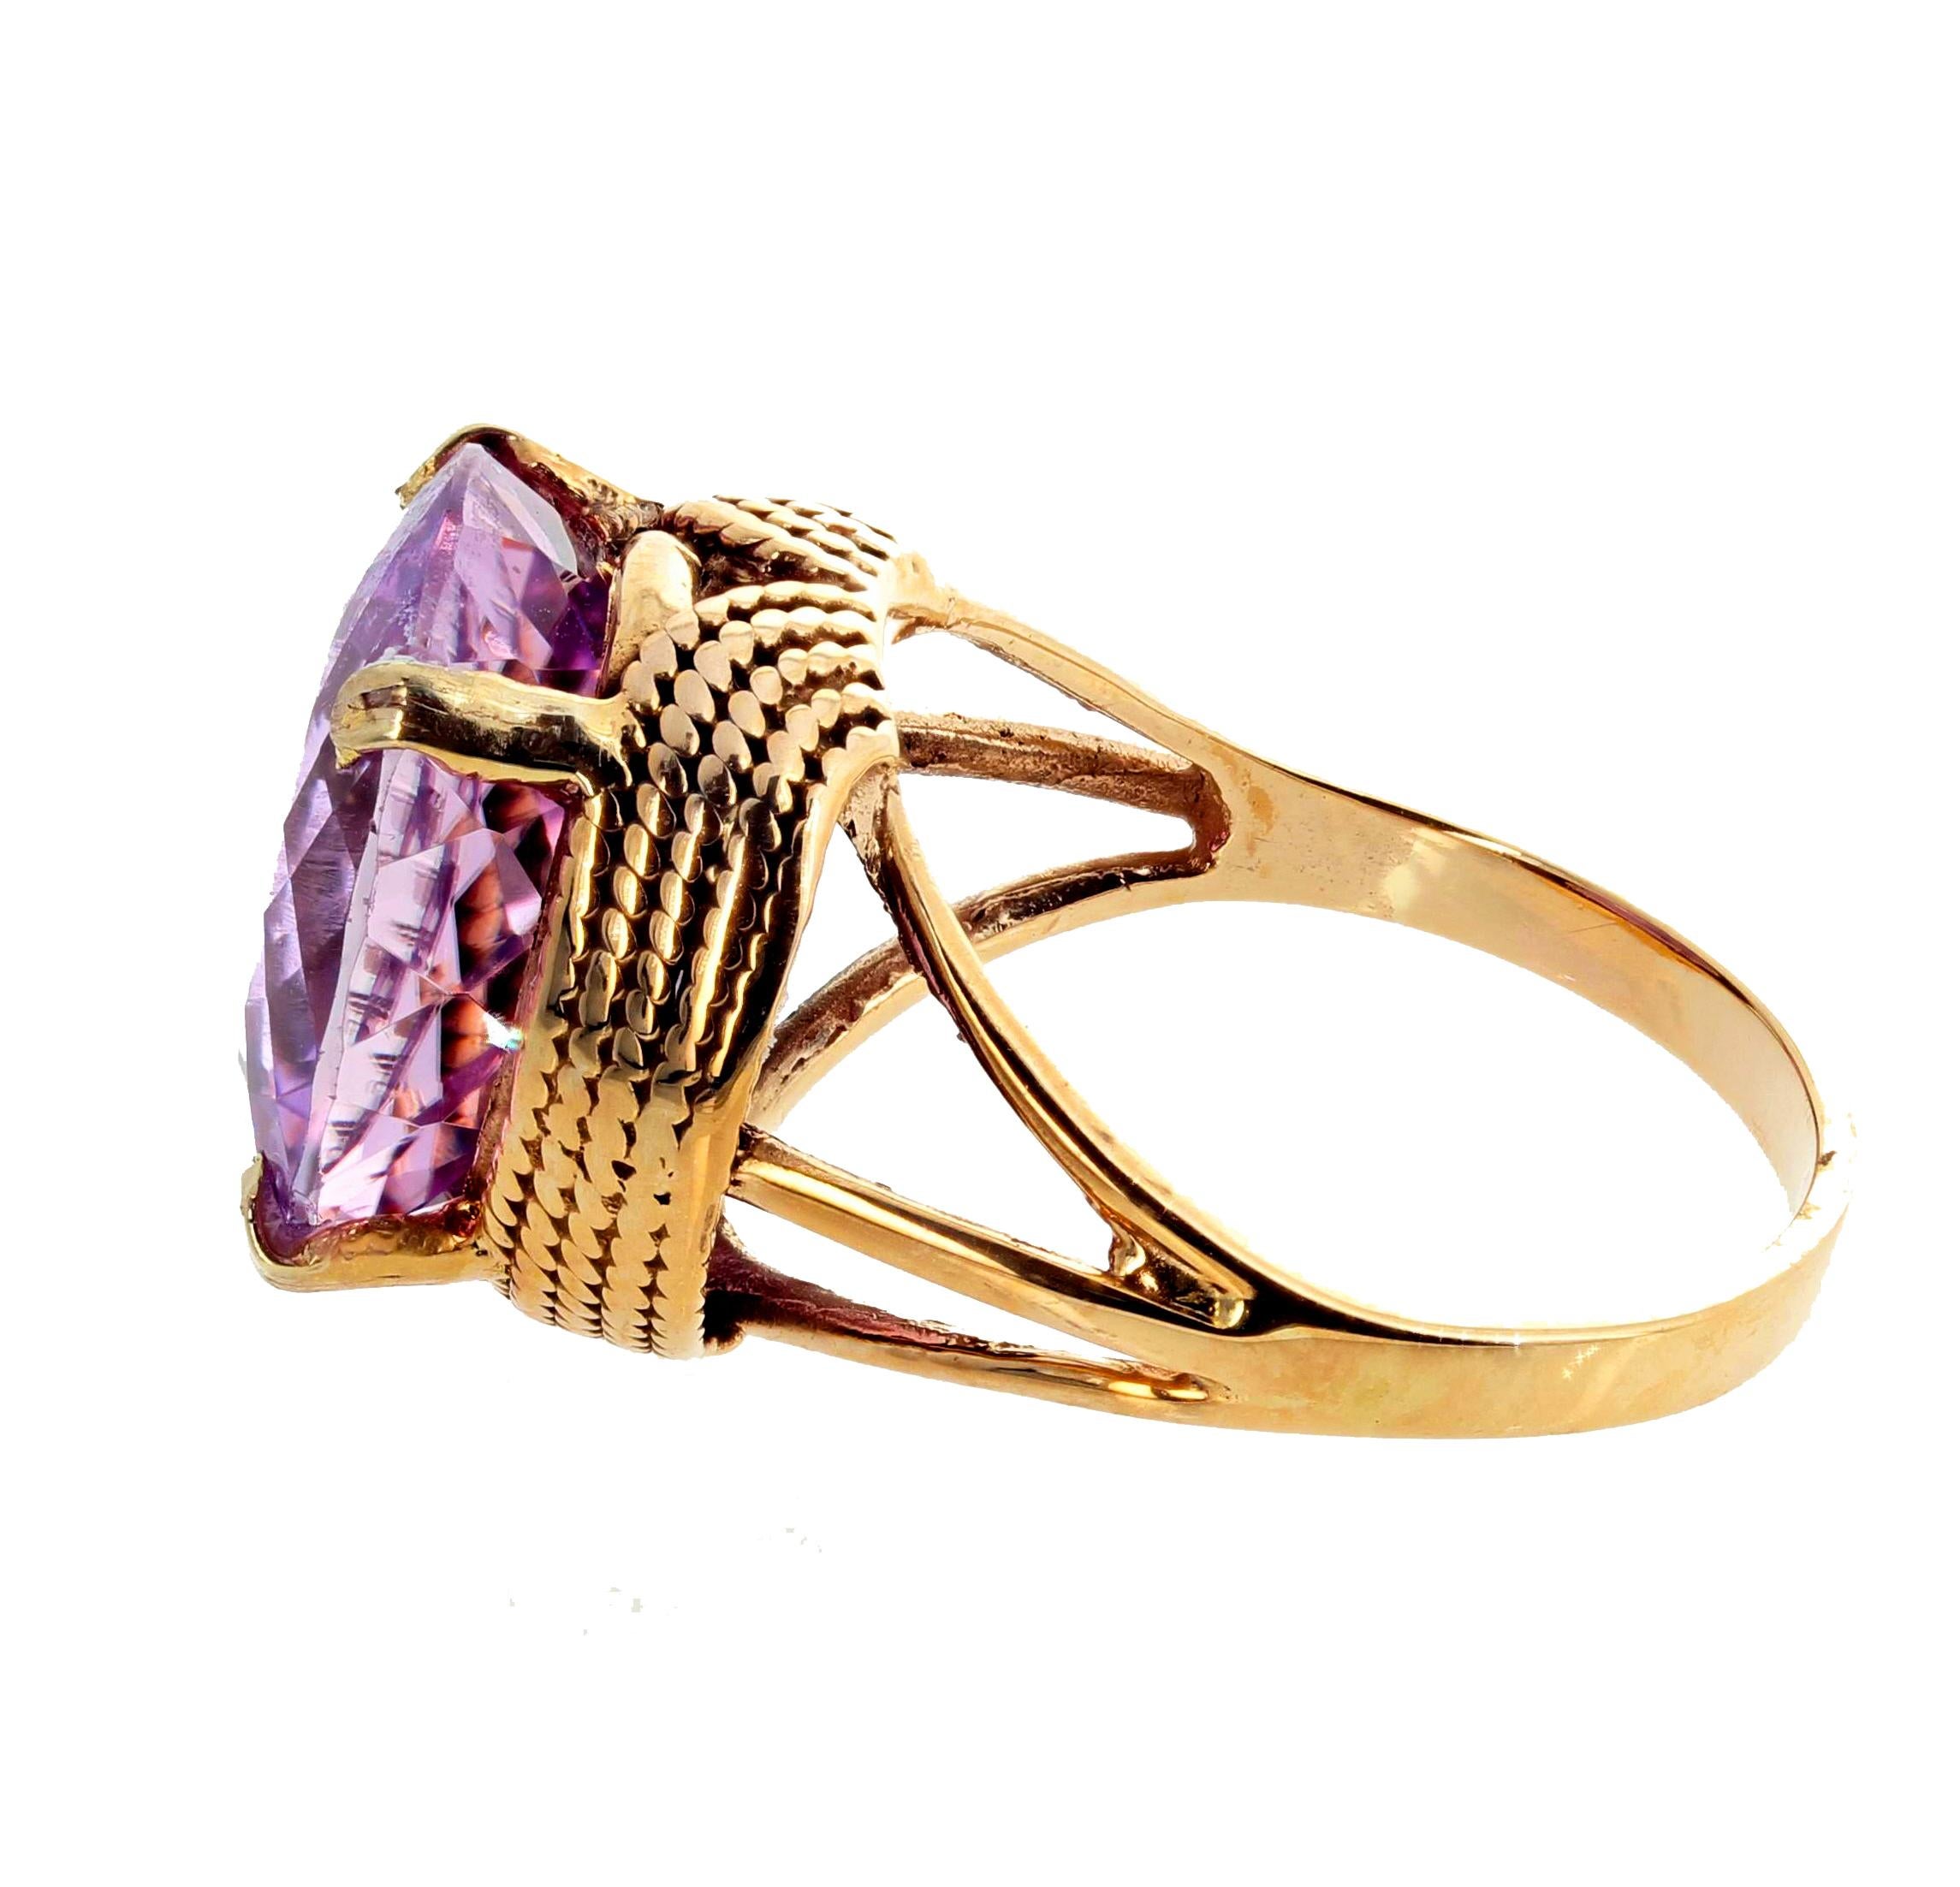 Round Cut AJD Extraordinary Rare 14.51Ct Natural Kunzite 14Kt Gold Cocktail Ring For Sale